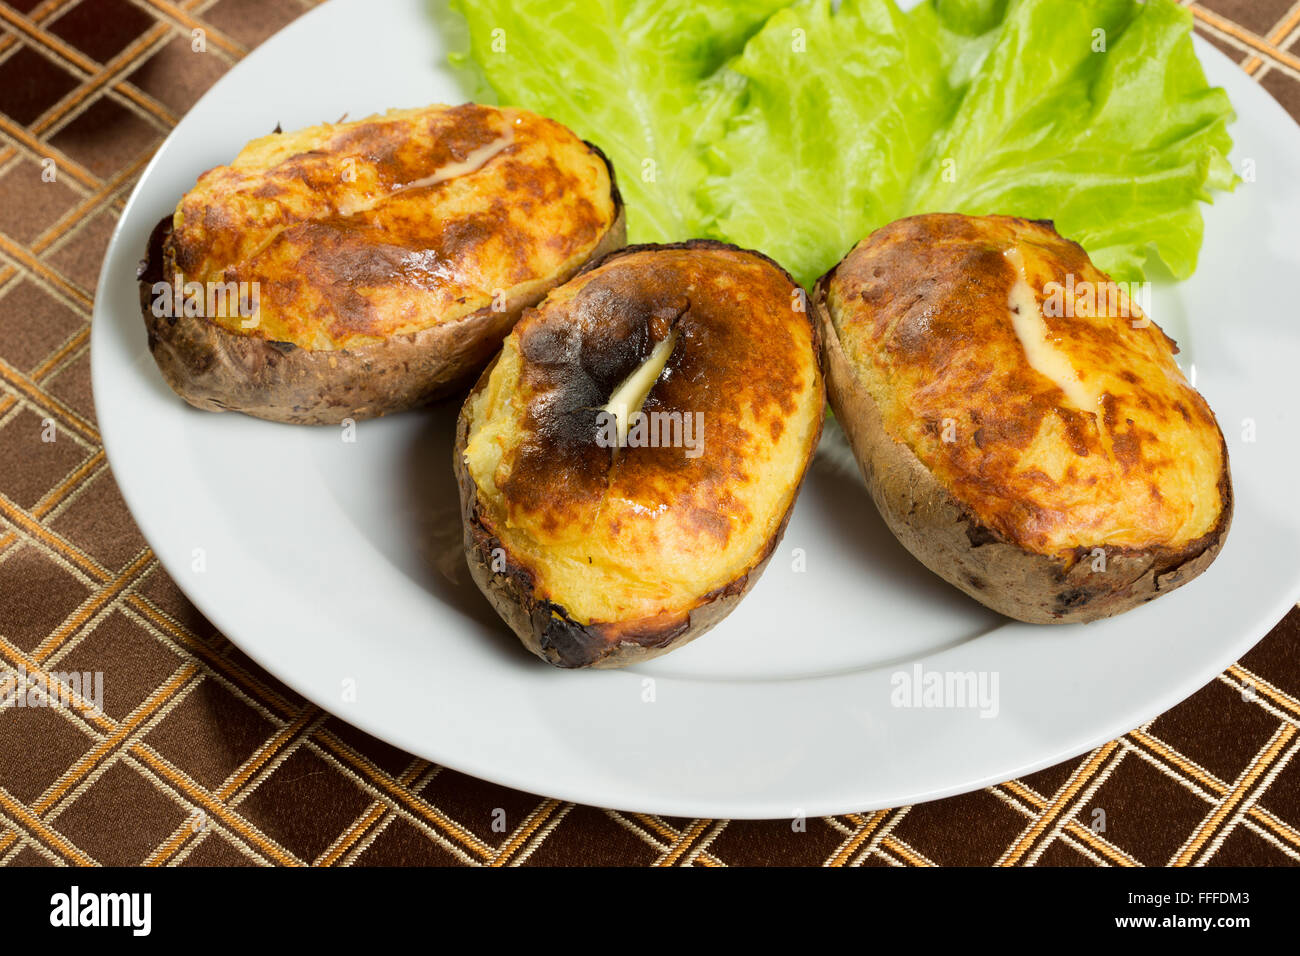 baked potatoes whole in their skins Stock Photo